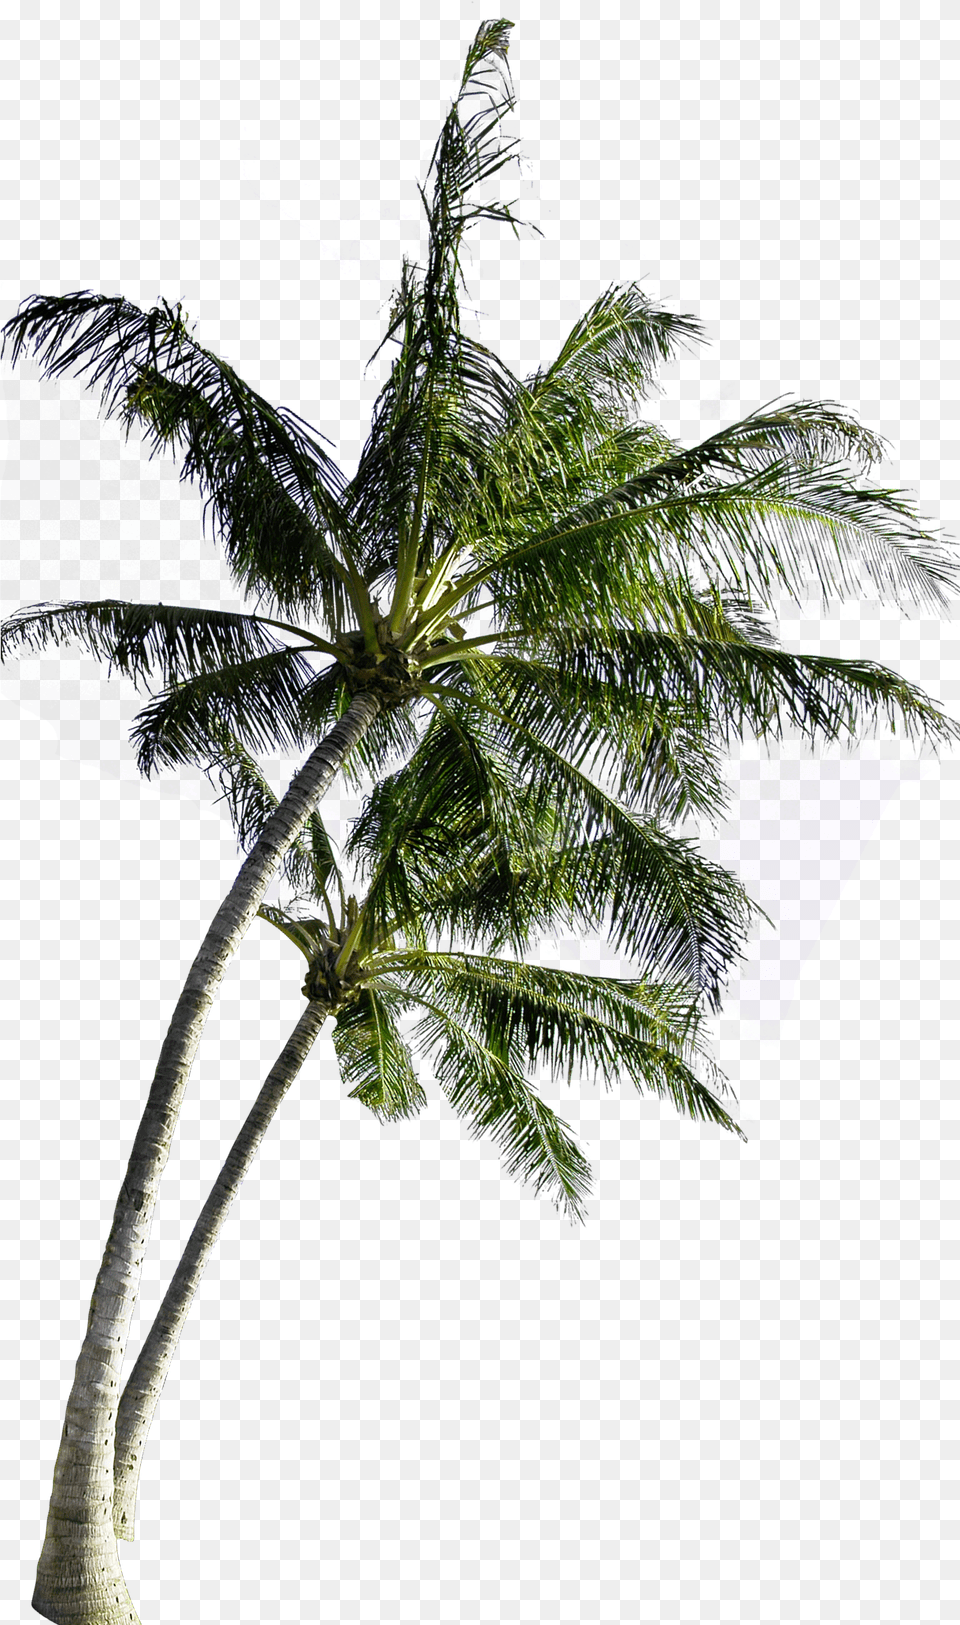 Download Coconut Computer Tree File Coconut Tree, Palm Tree, Plant, Leaf, Nature Png Image